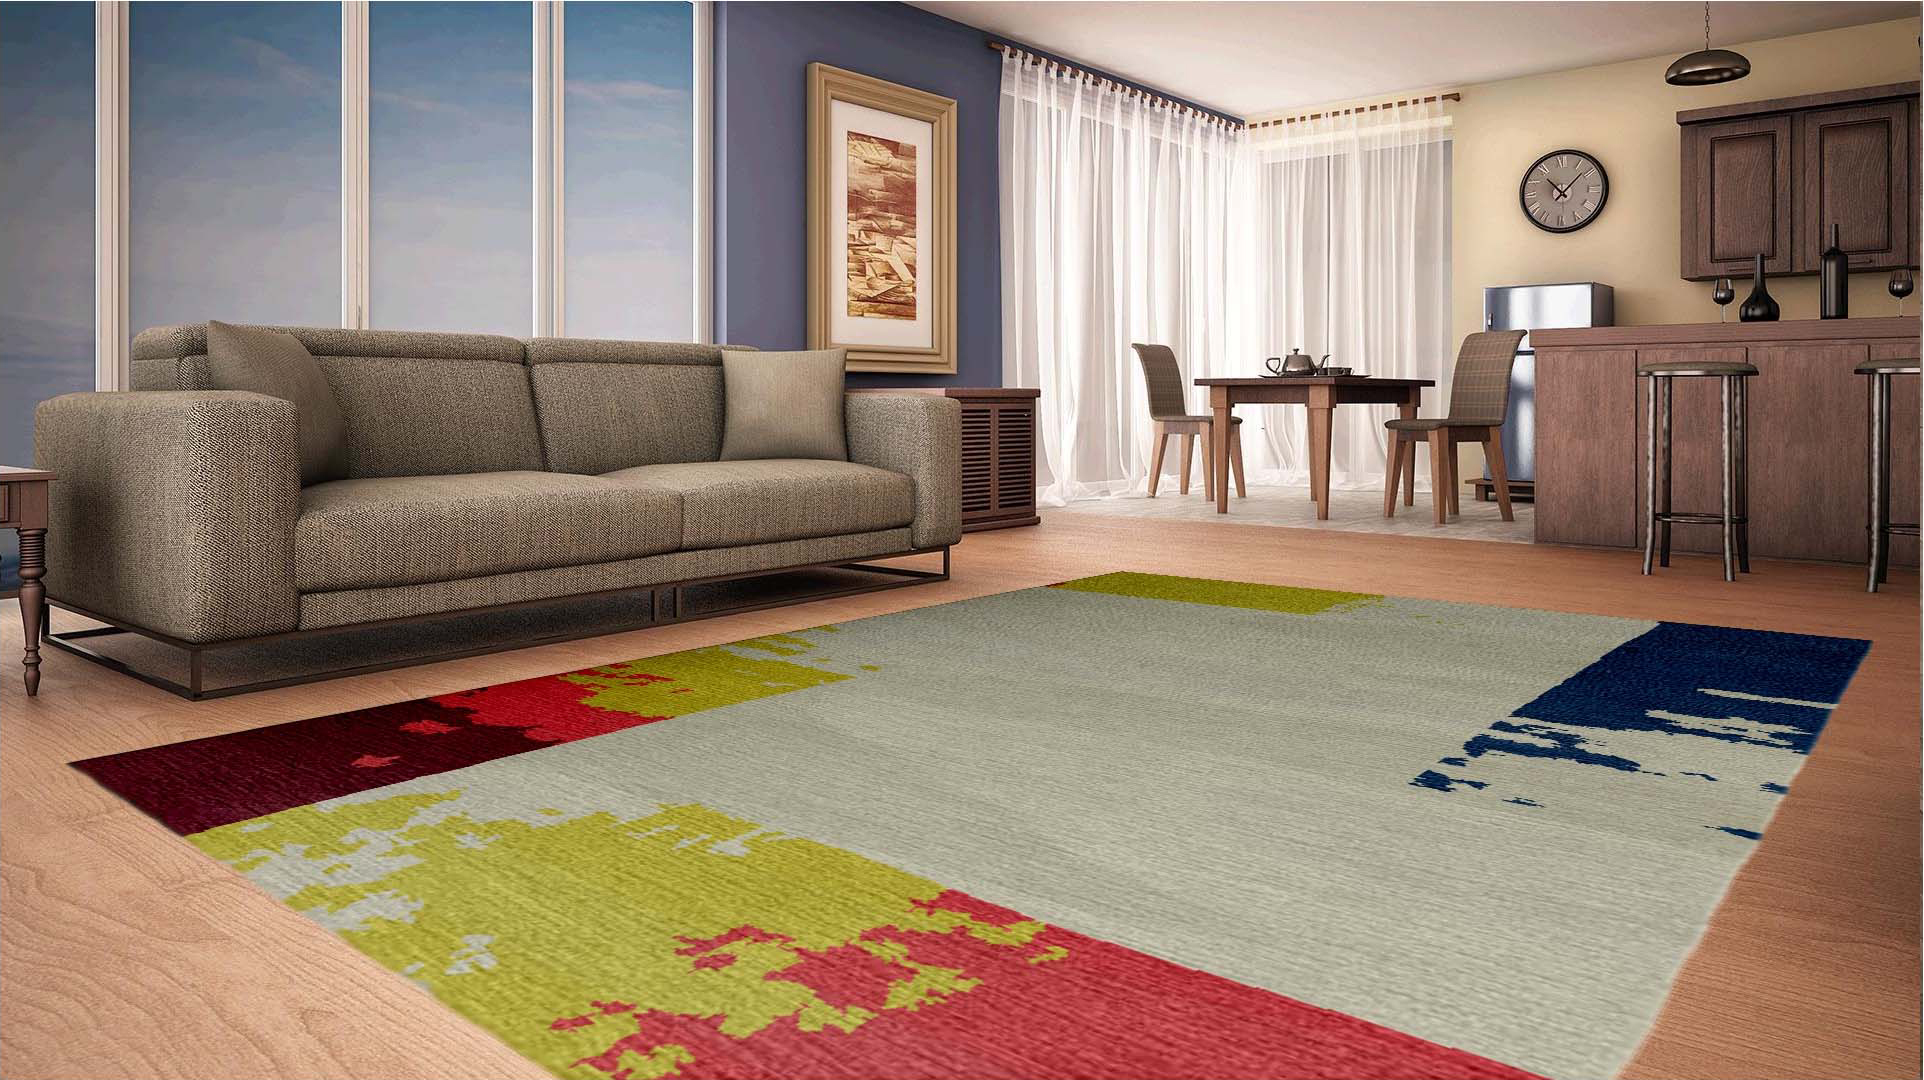 GUIDELINES TO FOLLOW BEFORE CLEANING YOUR CARPET AT HOME